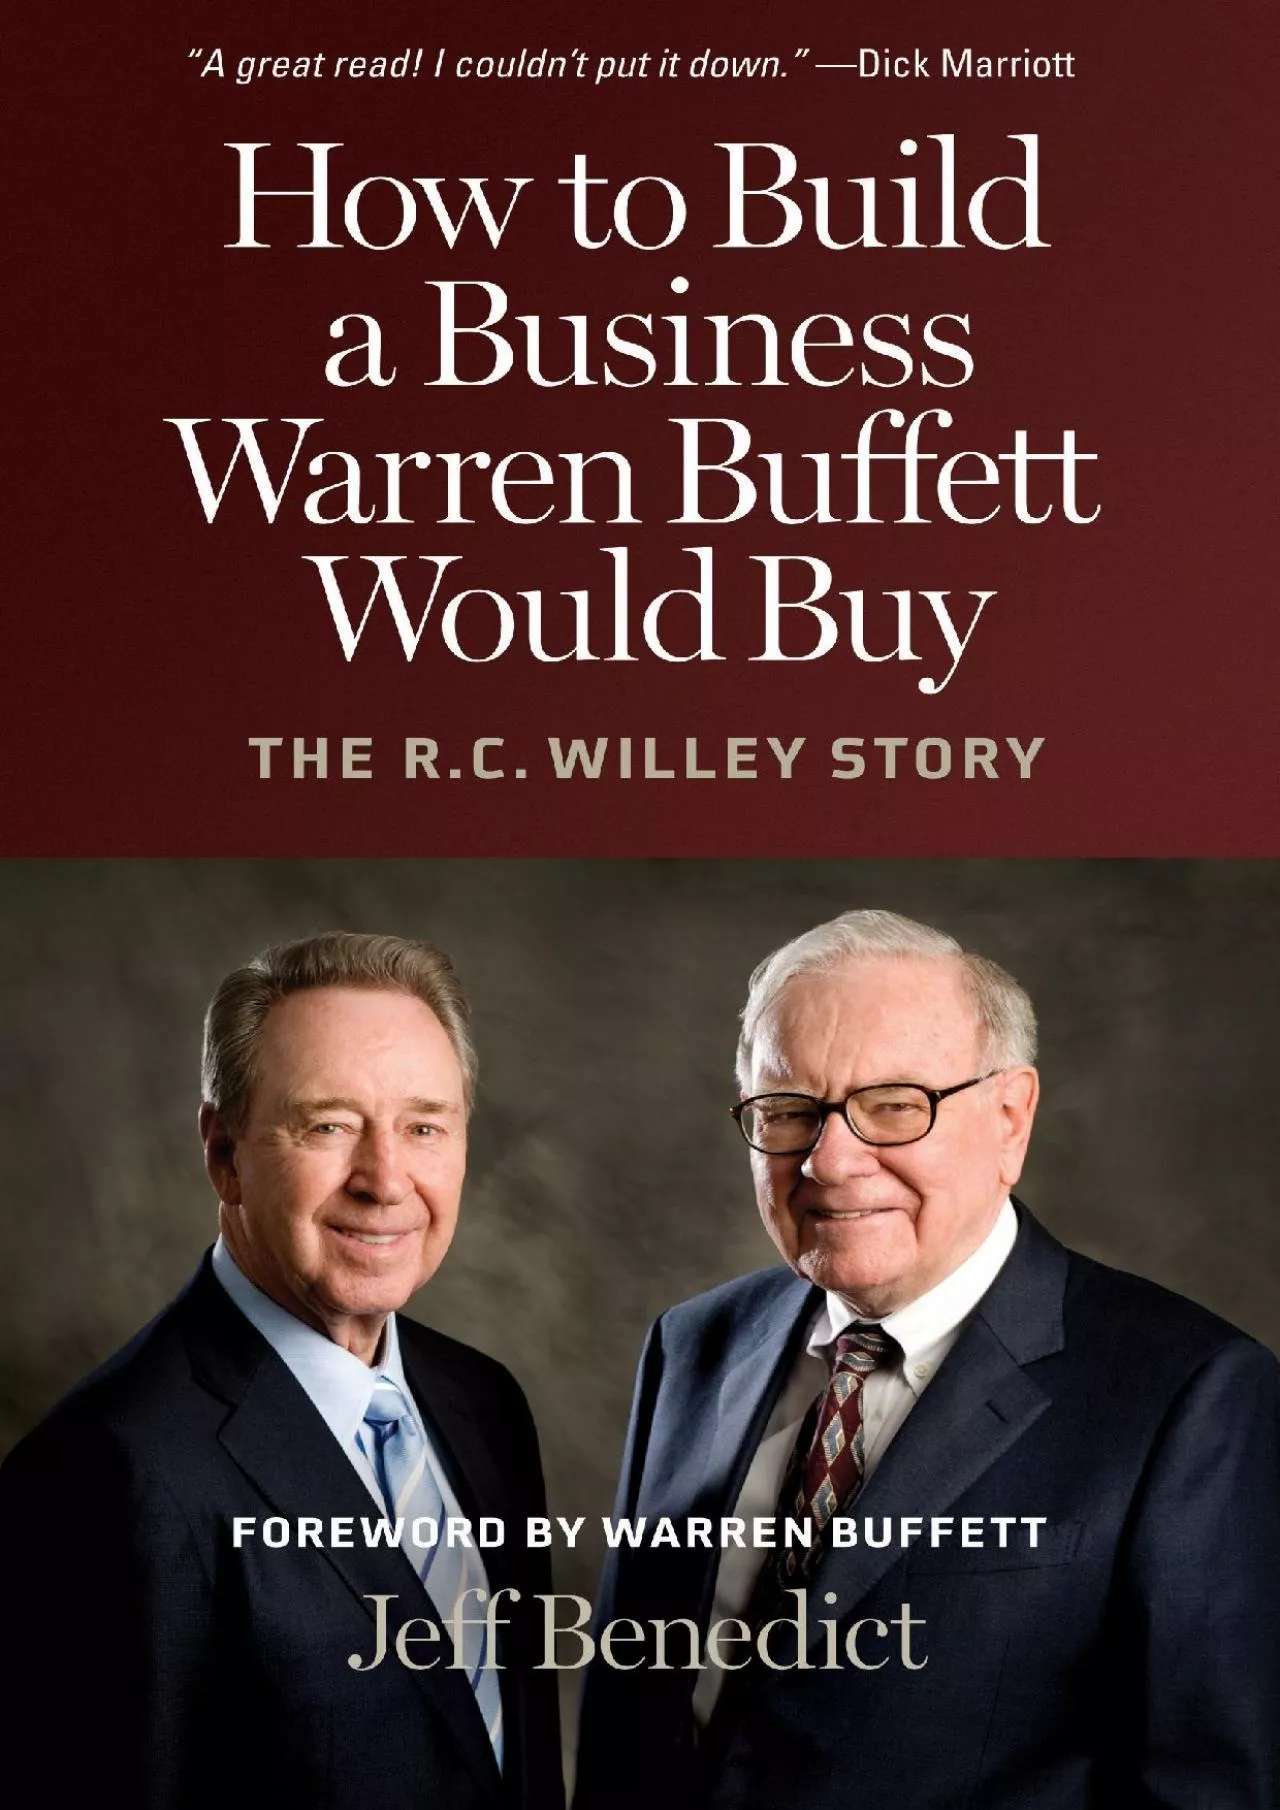 (EBOOK)-How to Build a Business Warren Buffett Would Buy: The R. C. Willey Story